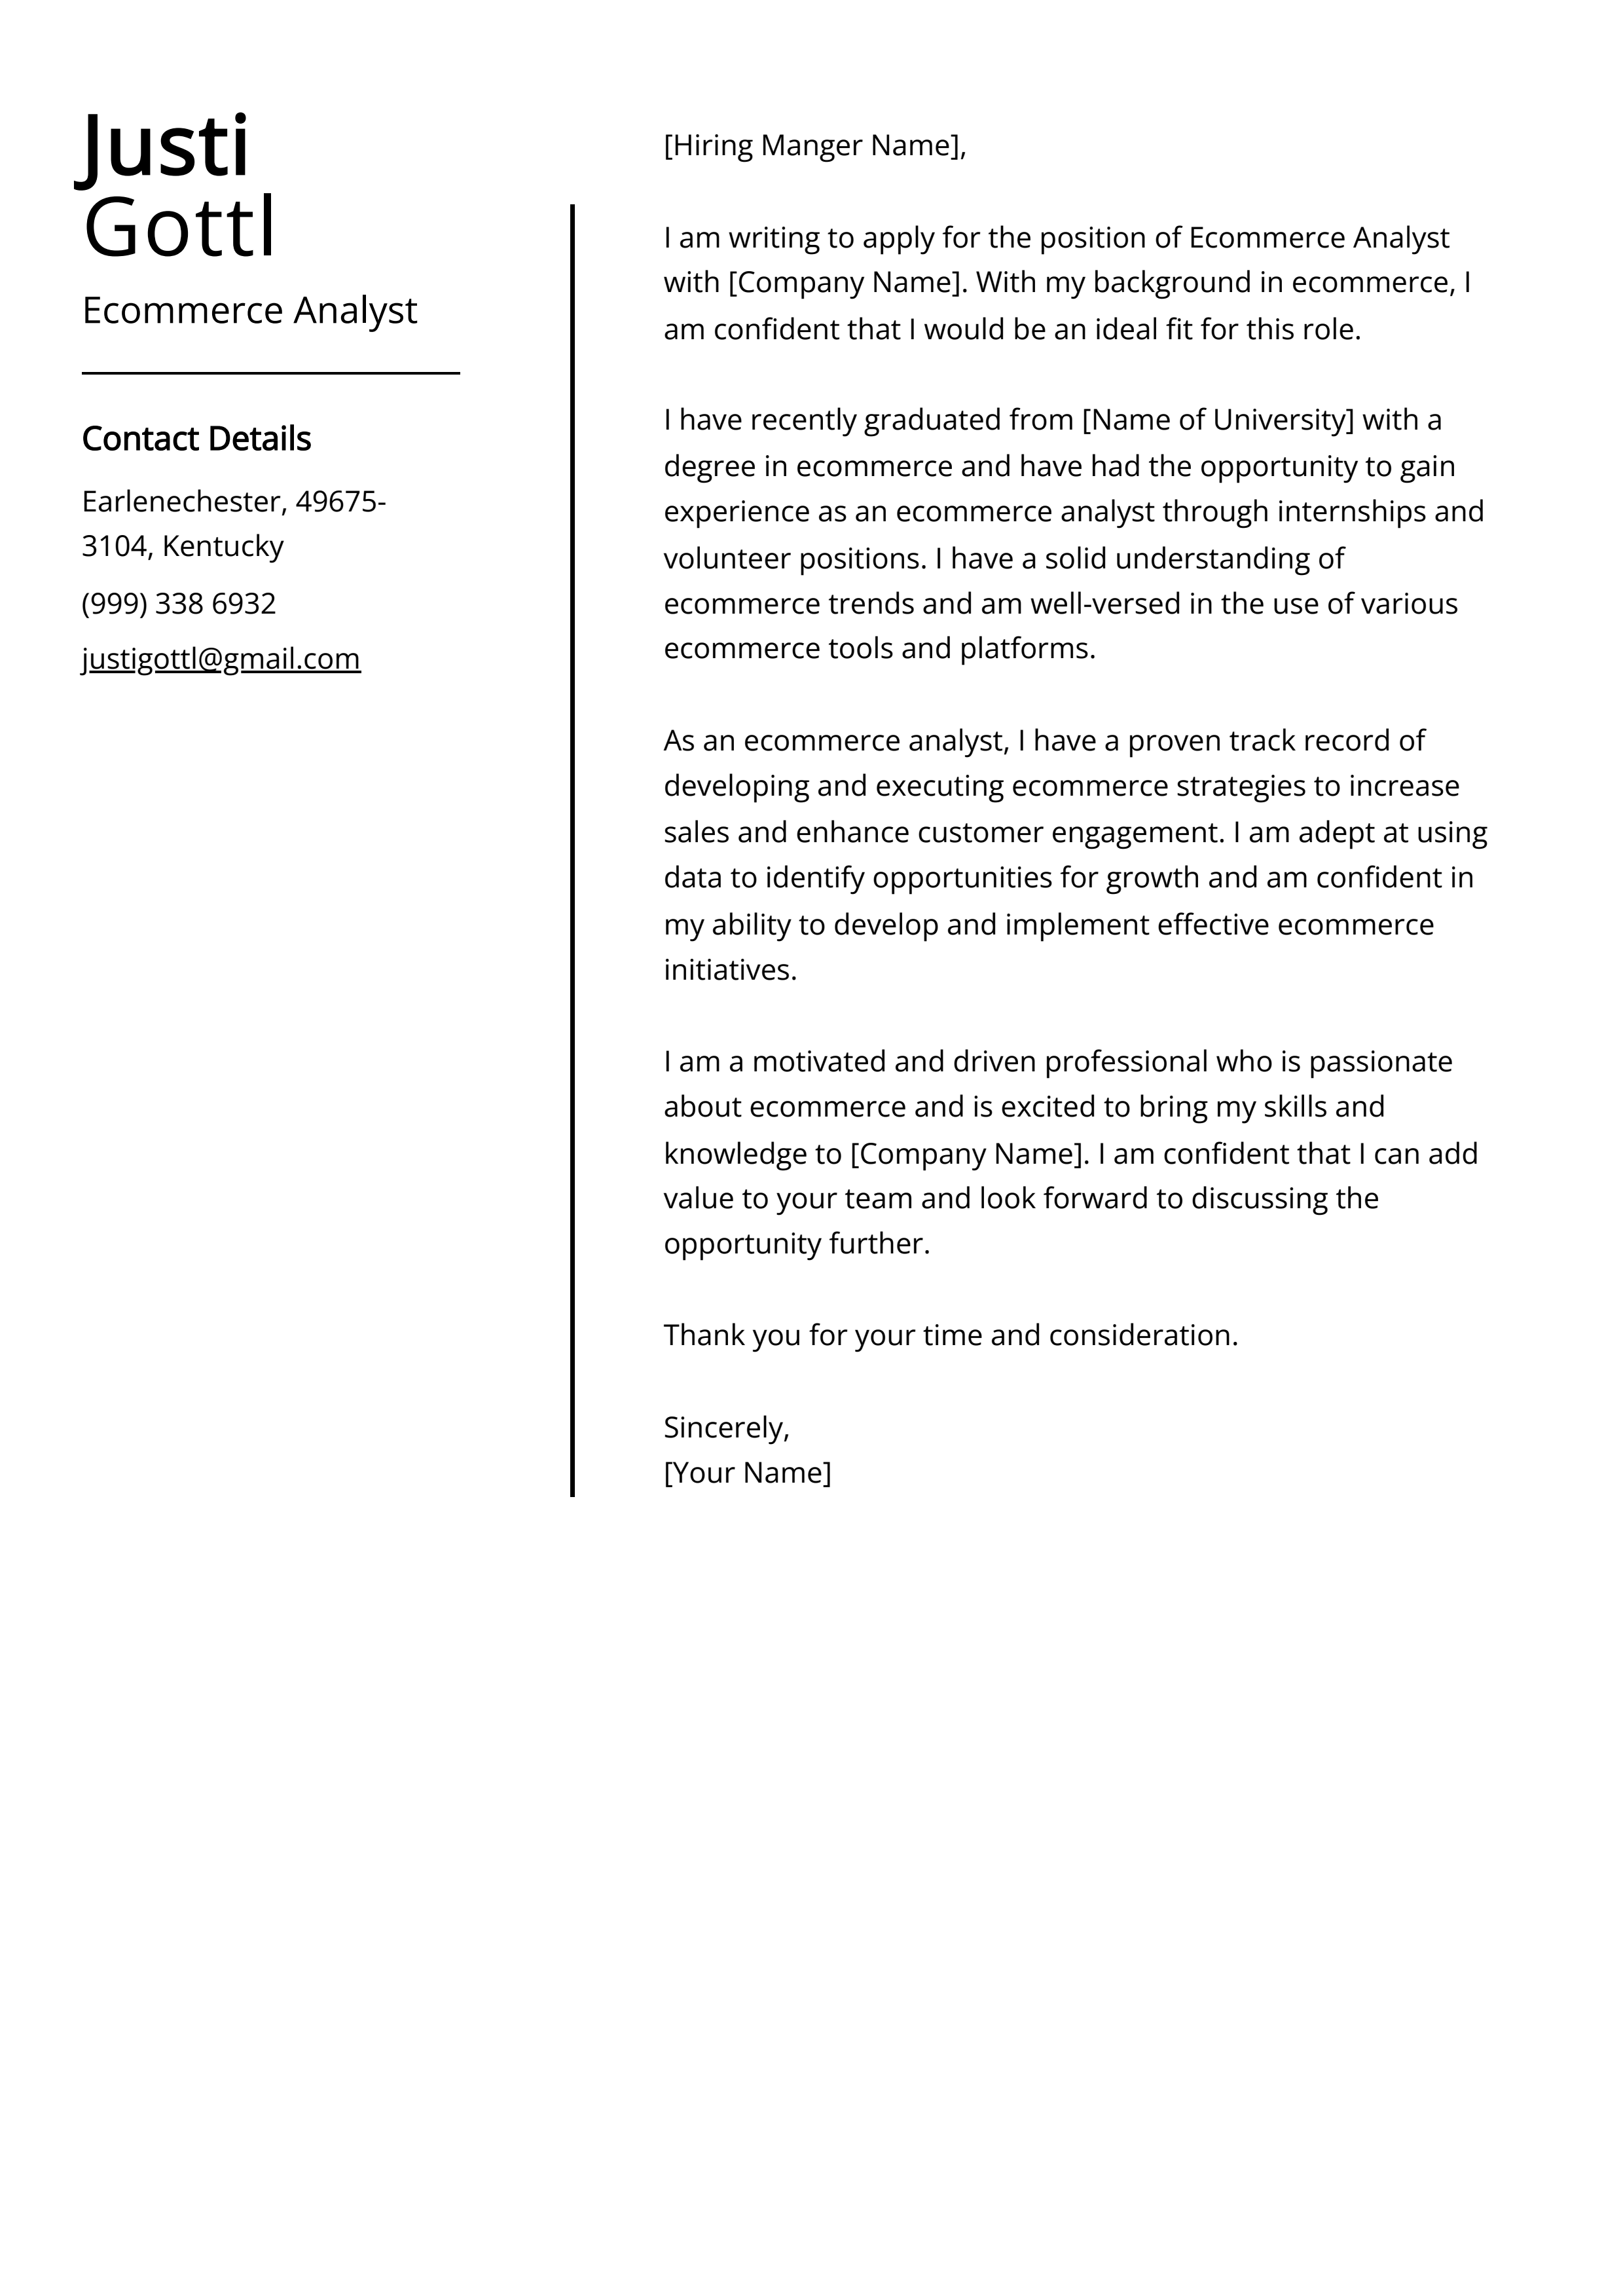 Ecommerce Analyst Cover Letter Example